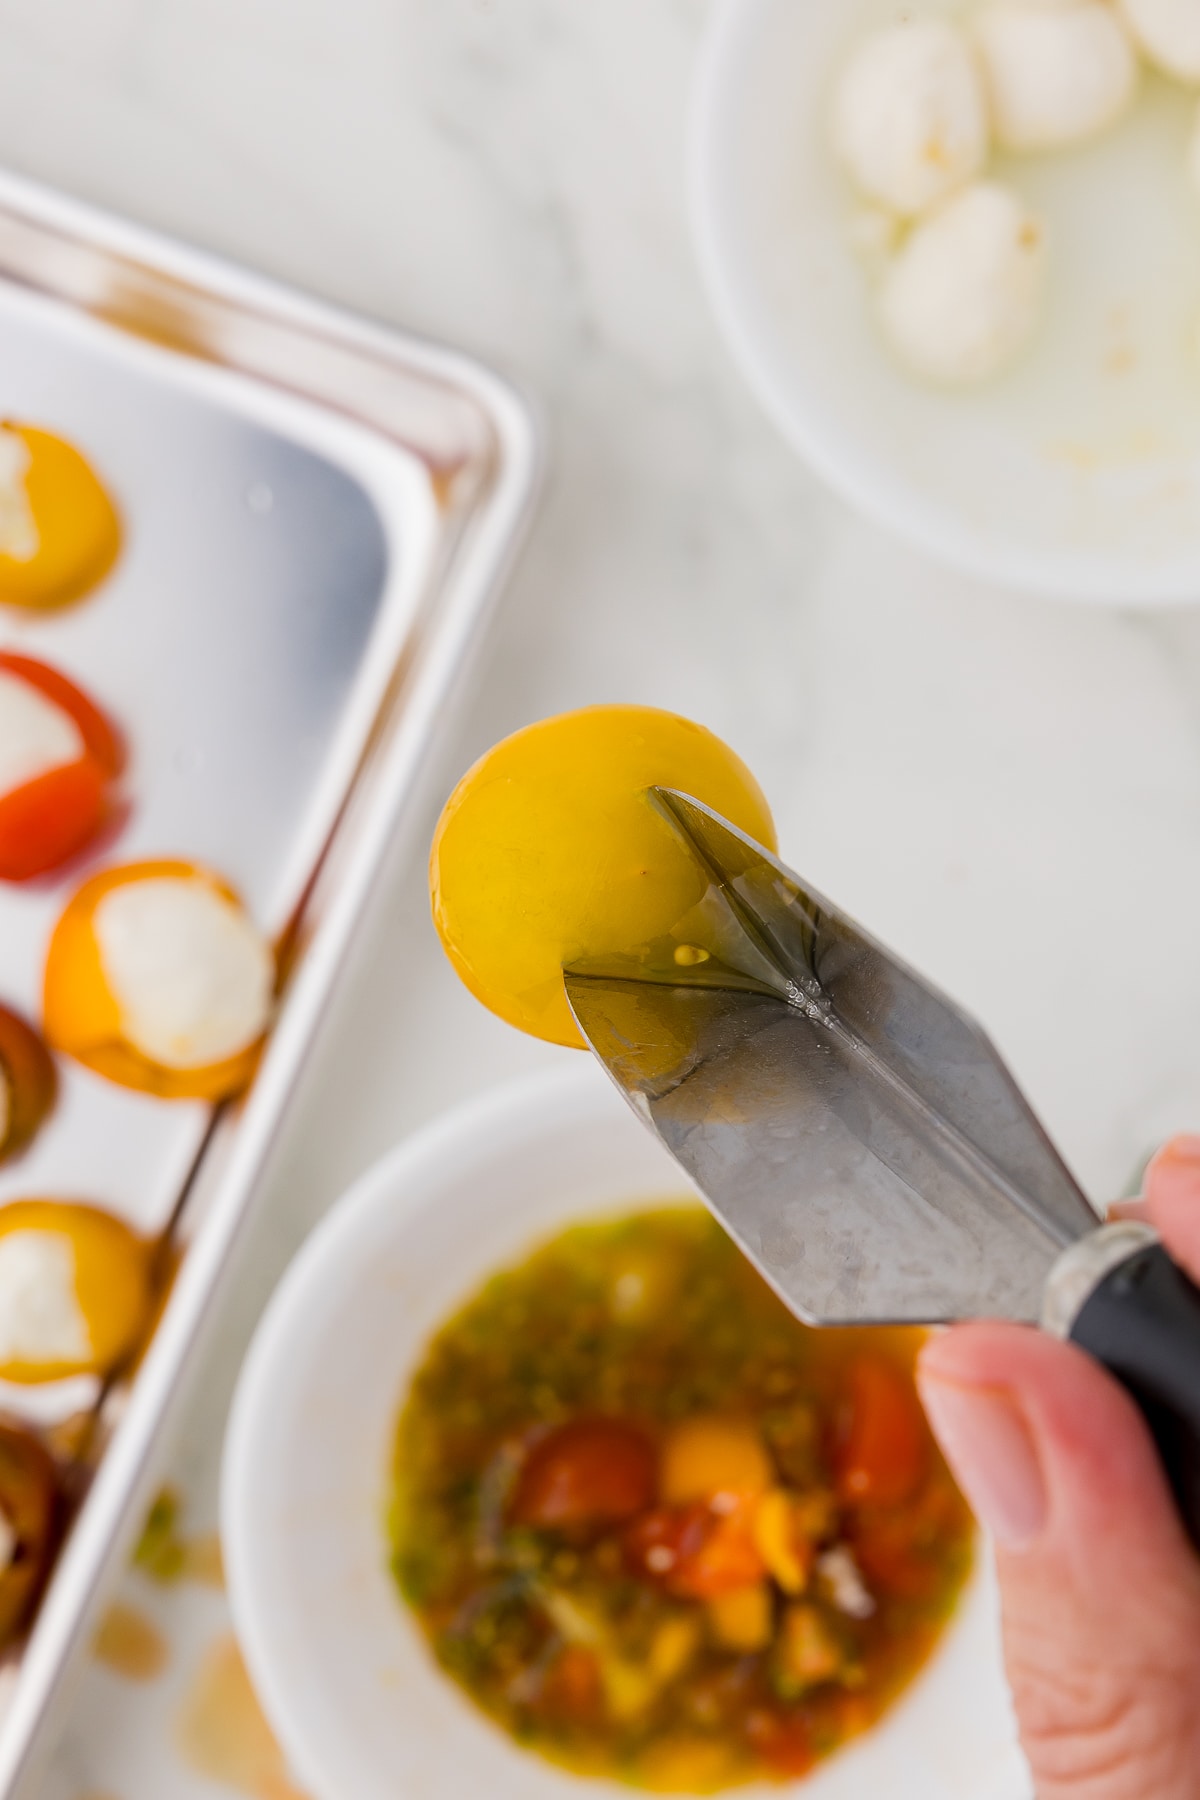 yellow cherry tomato being pierced with a v shaped garnish knife